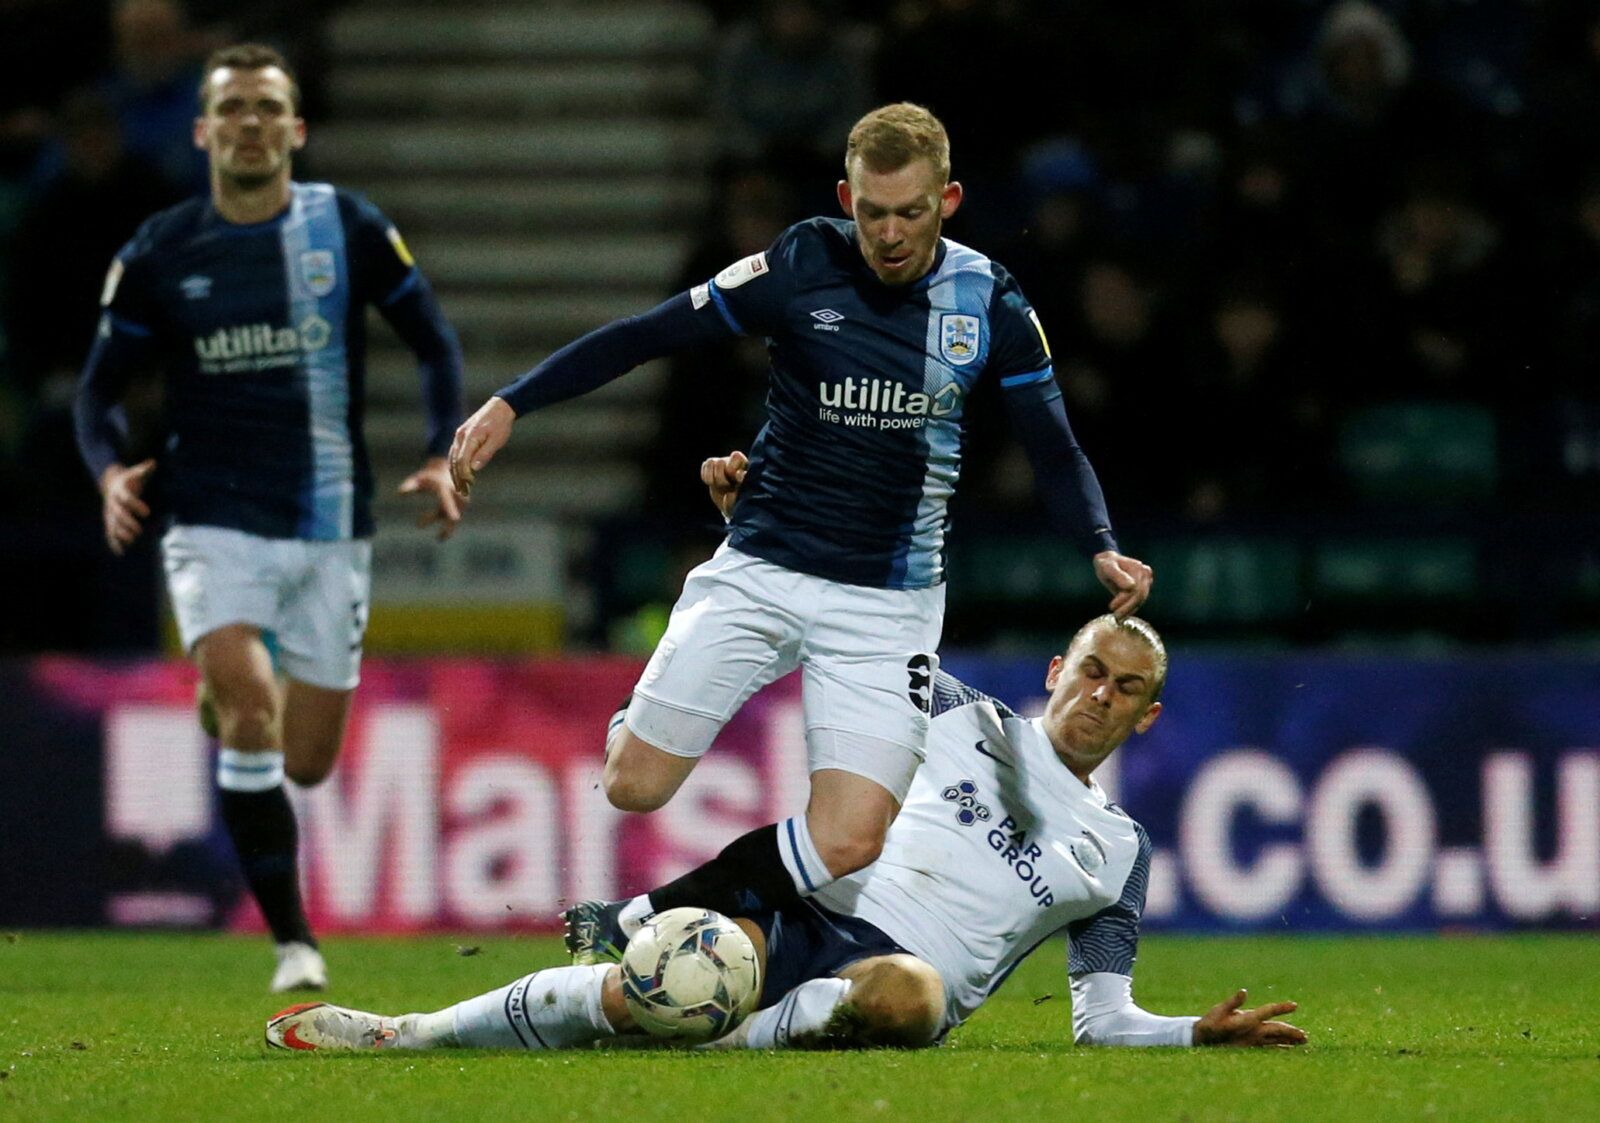 Soccer Football - Championship - Preston North End v Huddersfield Town - Deepdale, Preston, Britain - February 9, 2022  Huddersfield Town's Lewis O'Brien in action with Preston North End's Brad Potts  Action Images/Ed Sykes  EDITORIAL USE ONLY. No use with unauthorized audio, video, data, fixture lists, club/league logos or 